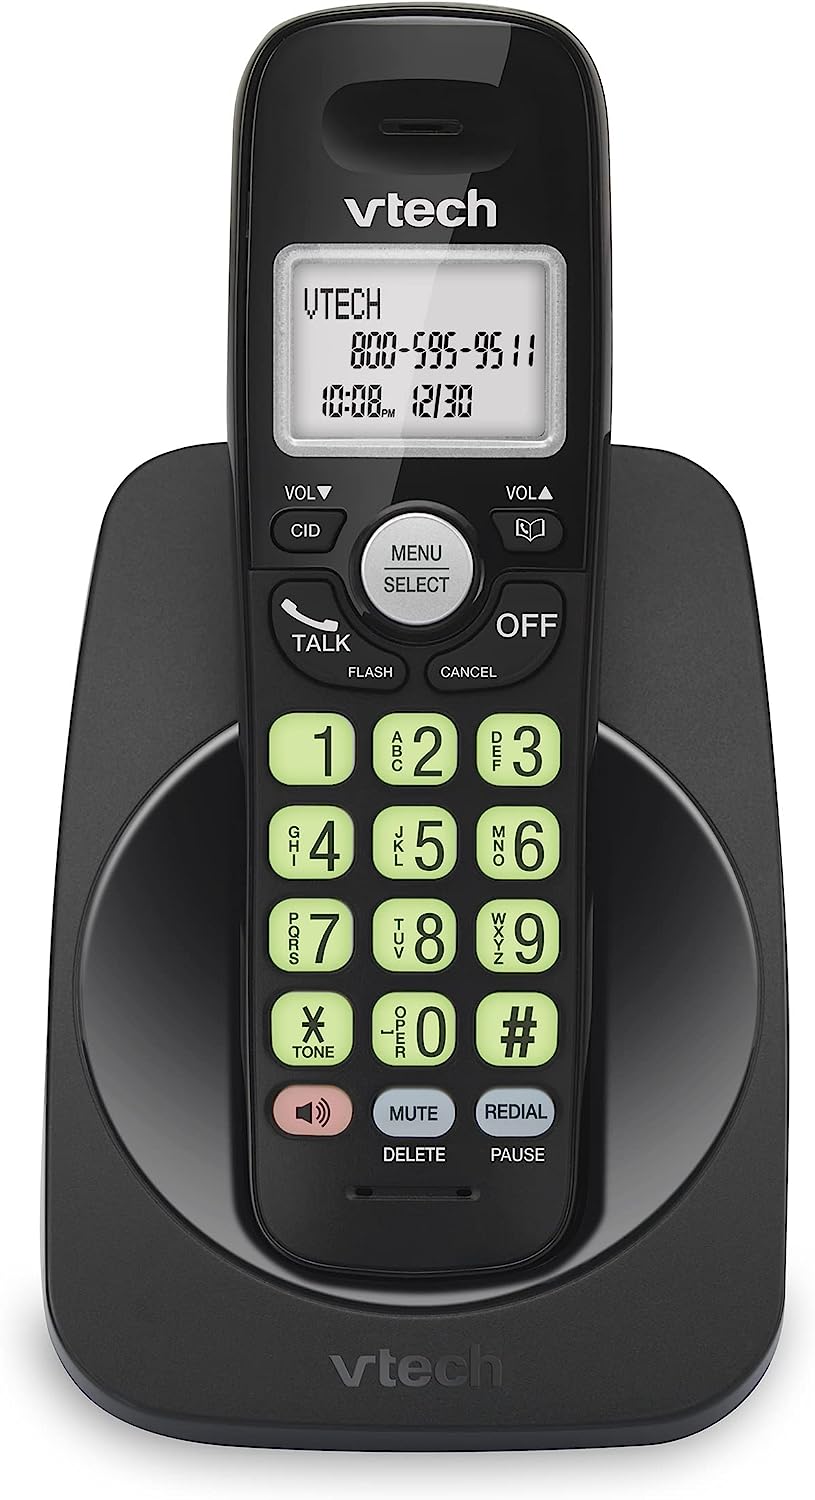 VTech VG101-11 DECT 6.0 Cordless Phone for Home, Blue- [...]